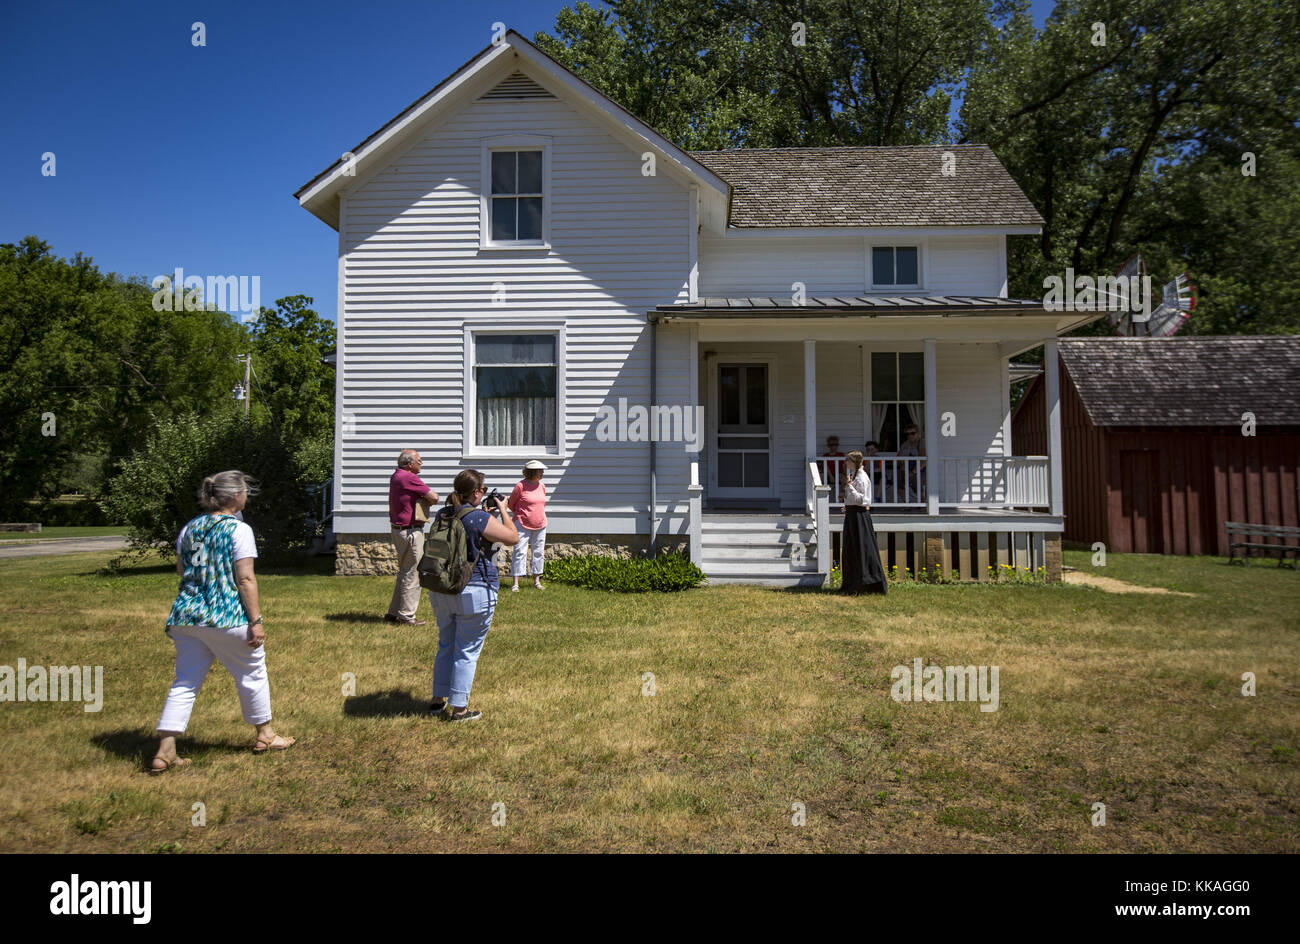 Cassville, Iowa, USA. 15th June, 2017. A group prepares for a tour of a residence set up to look true to the lifestyle of a farmer of the era in Cassville, Wisconsin, on Thursday, June 15, 2017. Stonefield Village is host to a display of 1800s agricultural machinery as well as a replica farming community from the mid 1800s which is located on the estate of Wisconsin's first Governor, Nelson Dewey. Credit: Andy Abeyta, Quad-City Times/Quad-City Times/ZUMA Wire/Alamy Live News Stock Photo